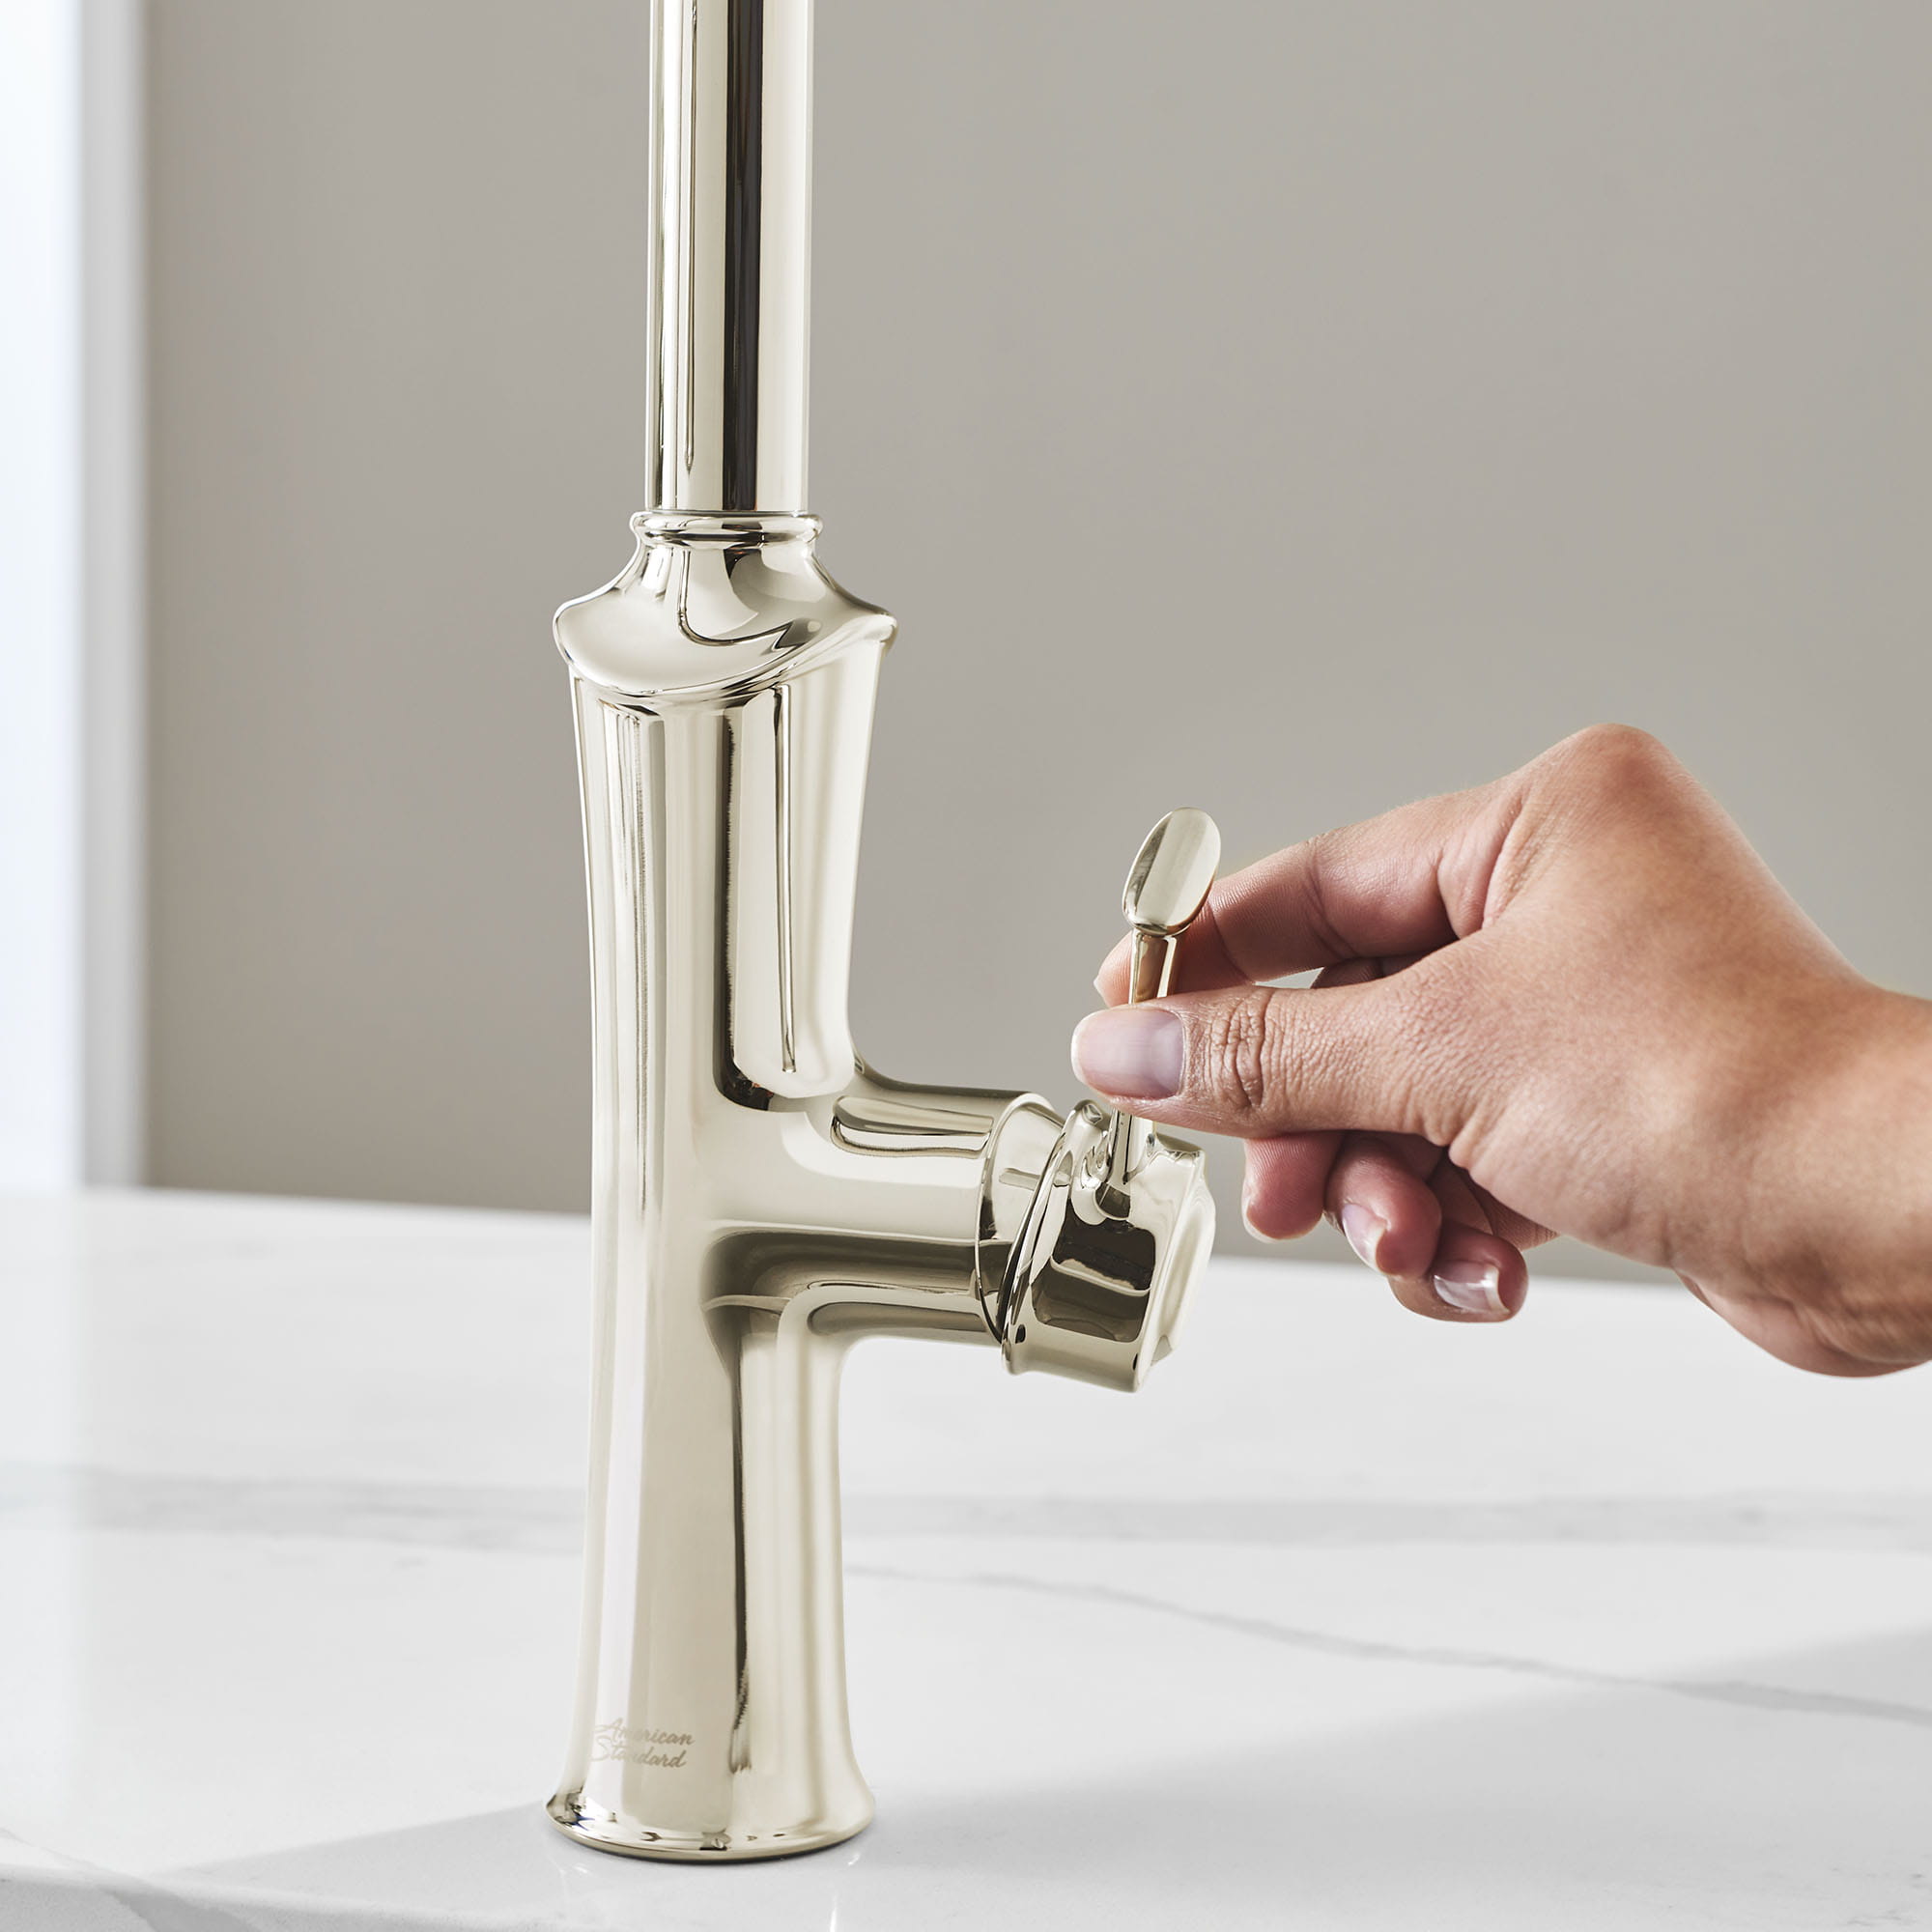 American Standard Vanek Pull-Down Kitchen Faucet with Soap Dispenser